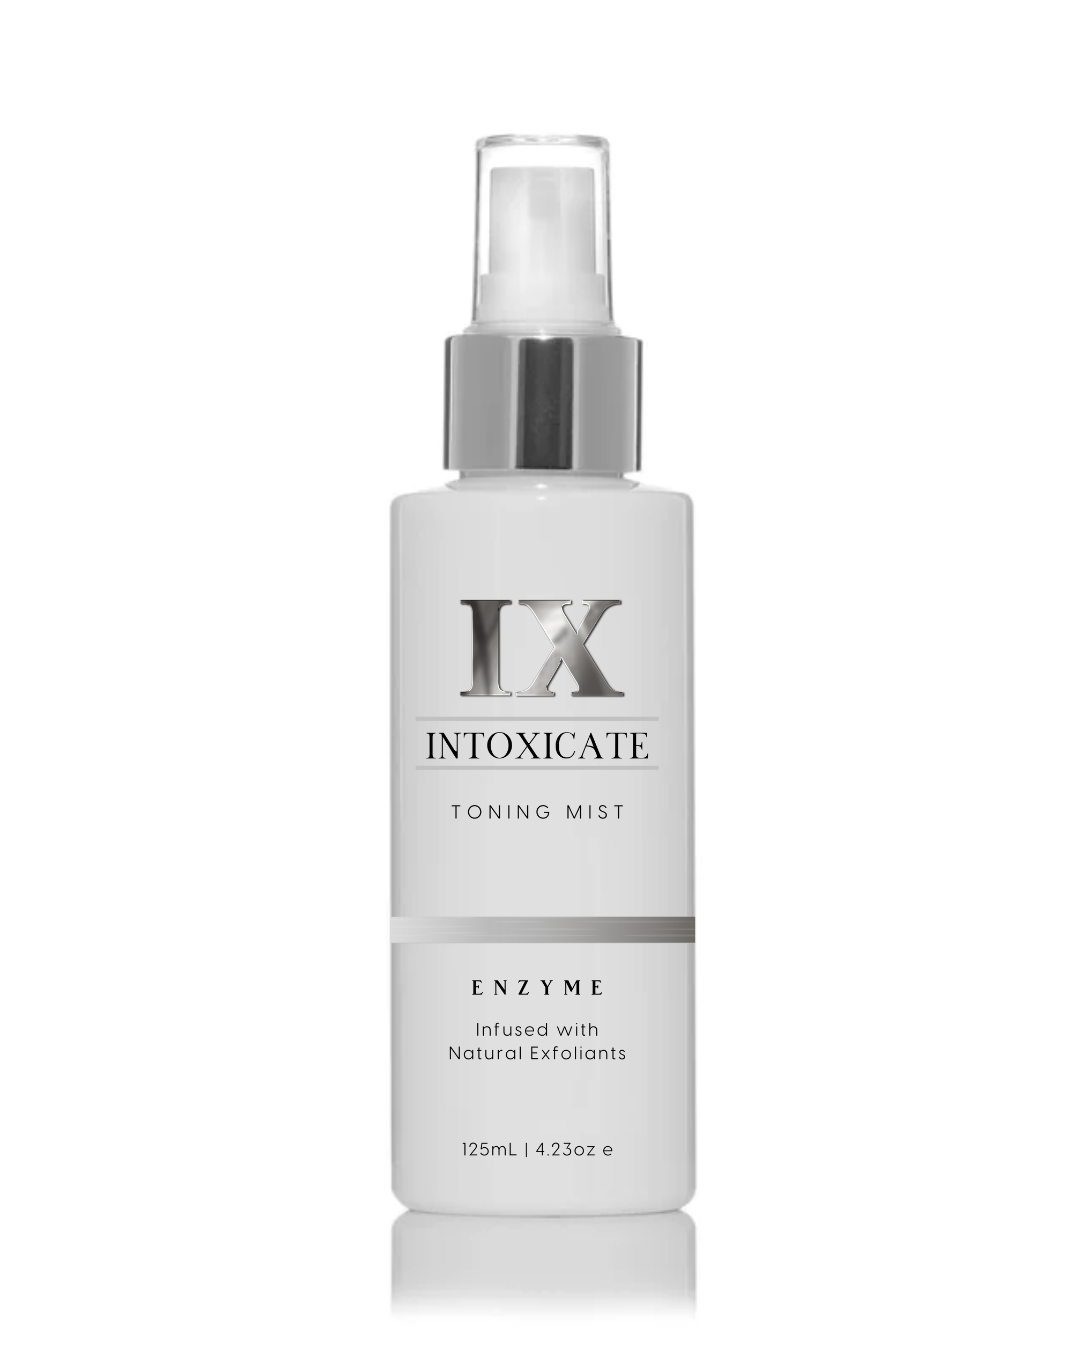 Intoxicate's Enzyme Toning Mist